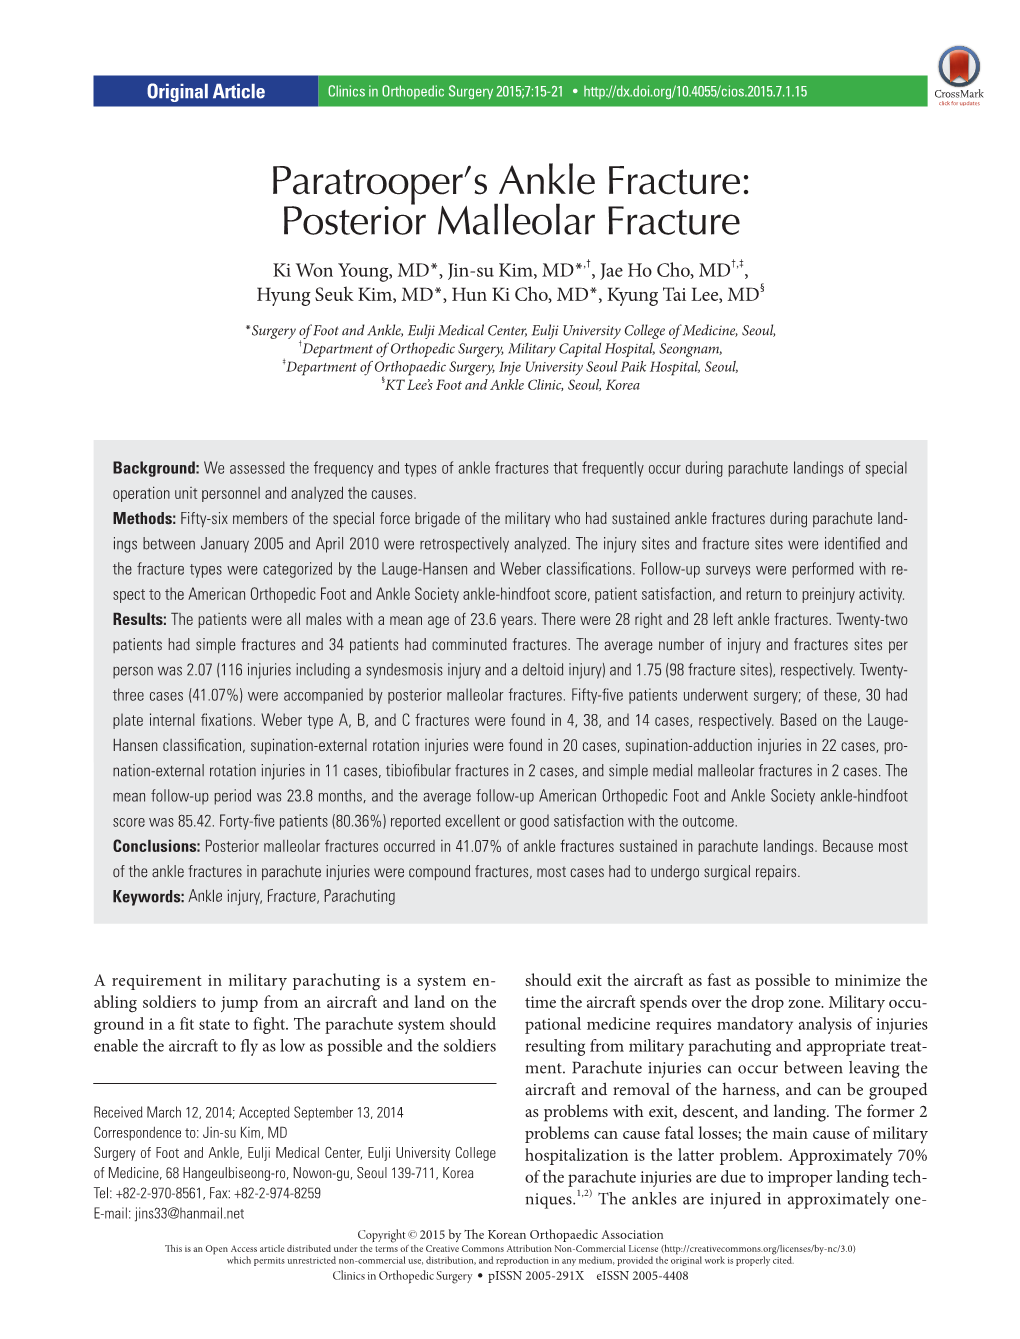 Paratrooper's Ankle Fracture: Posterior Malleolar Fracture Clinics in Orthopedic Surgery • Vol